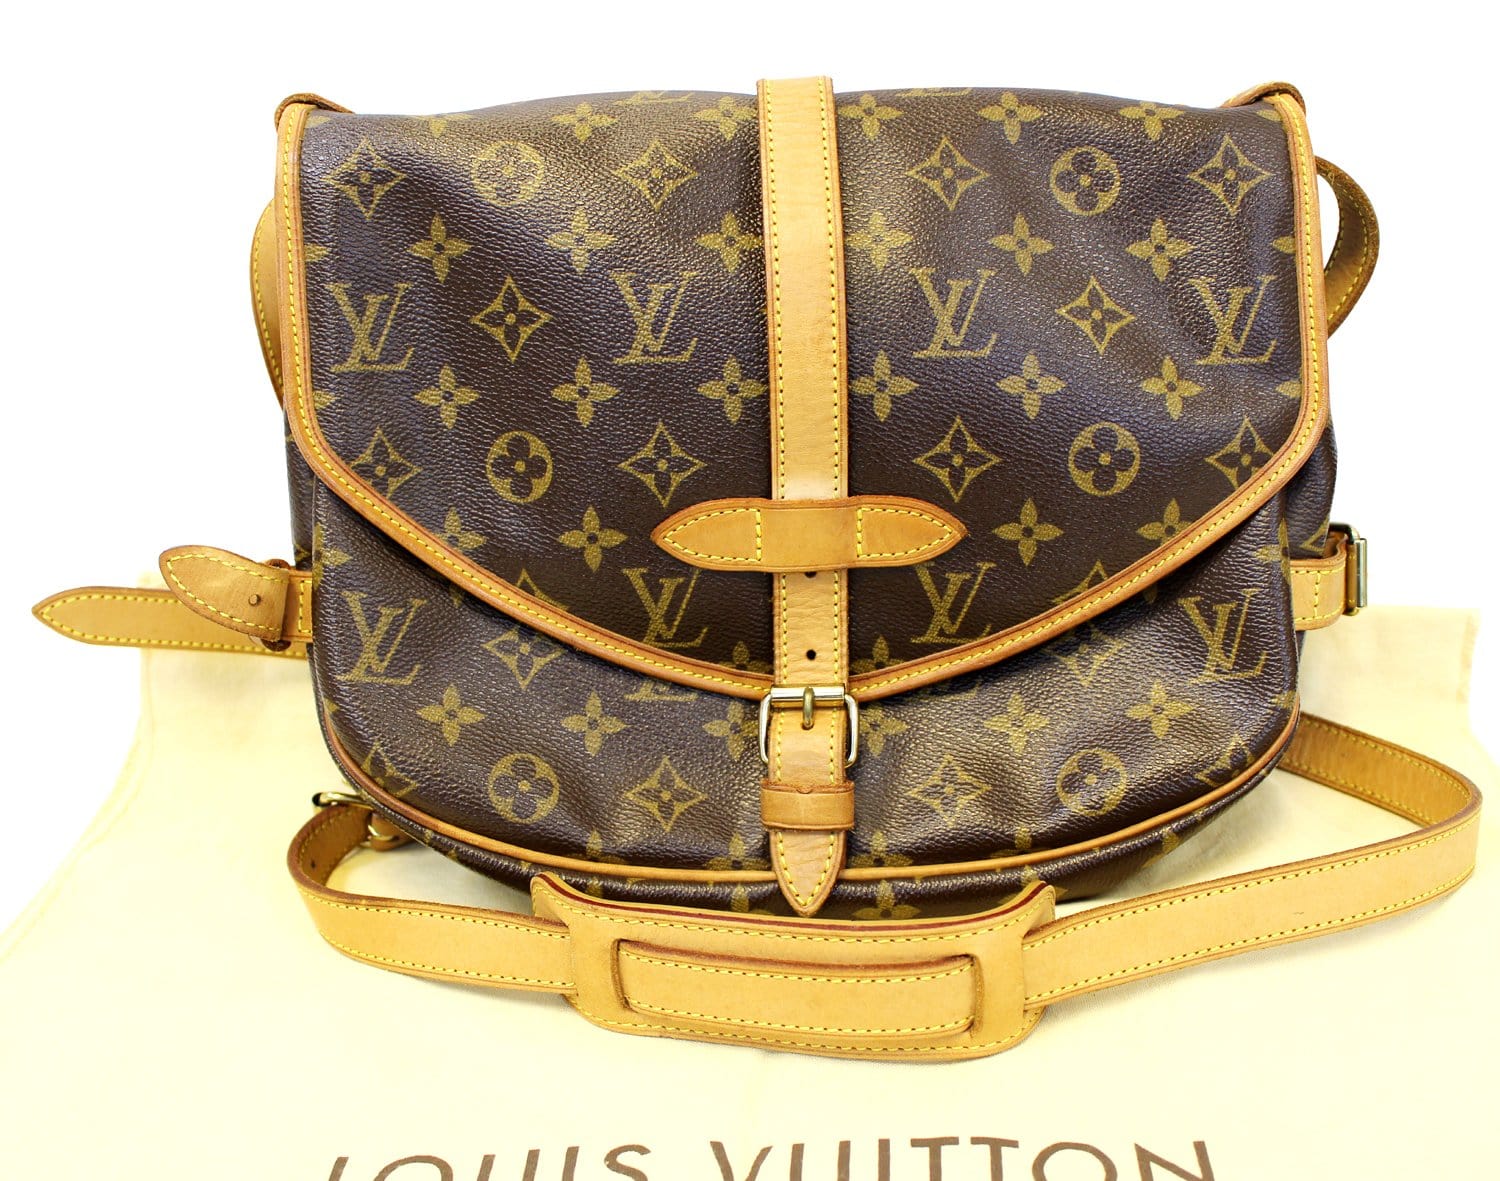 JUST IN! Louis Vuitton Saumur 30 & 35! Call/text us at ***-***-**** if you  would like to purchase before they …